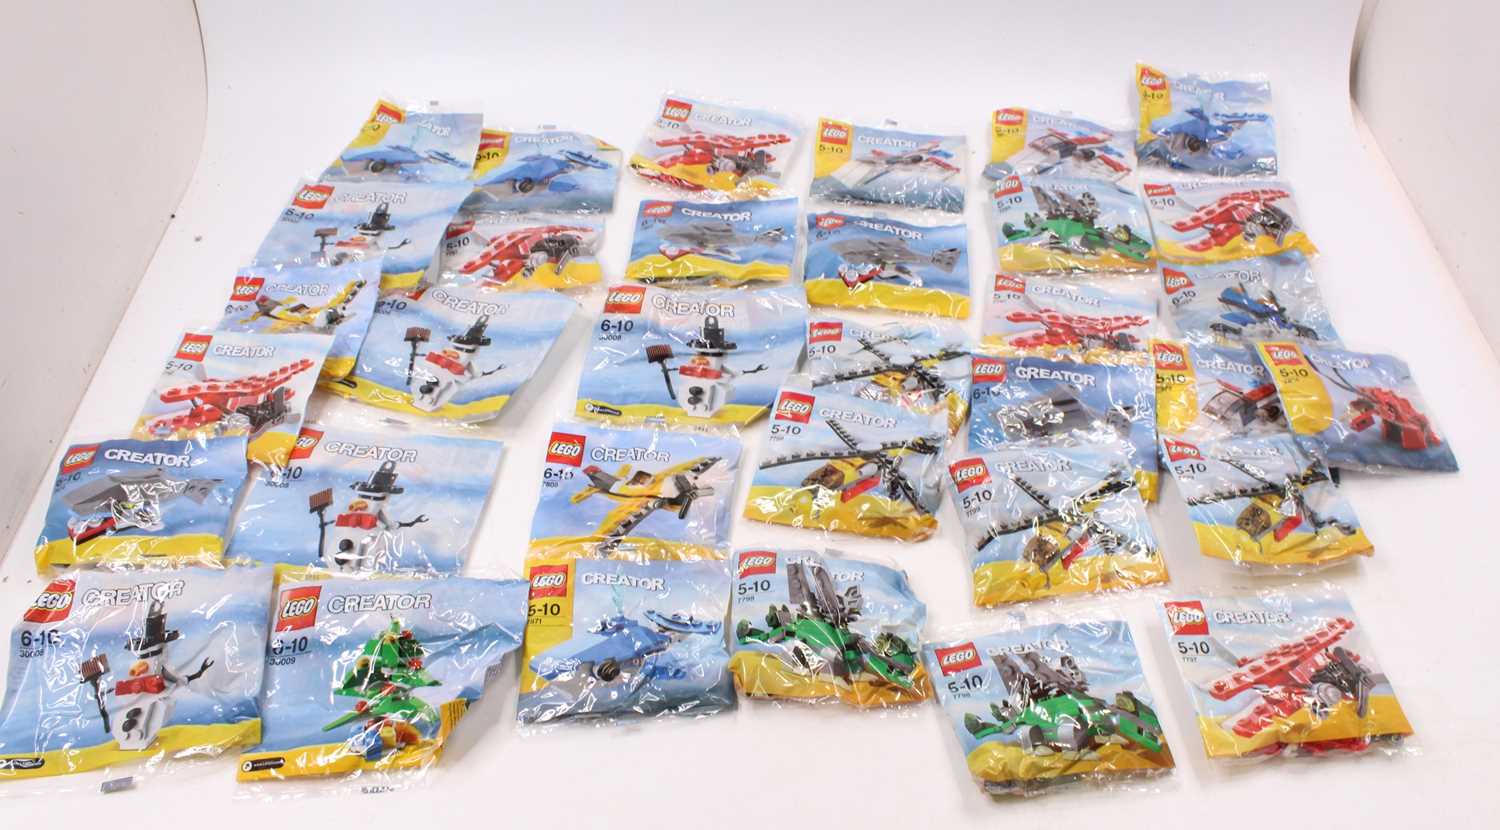 One tray containing a quantity of Lego Creator bagged construction kits to include No. 7871 Shark,